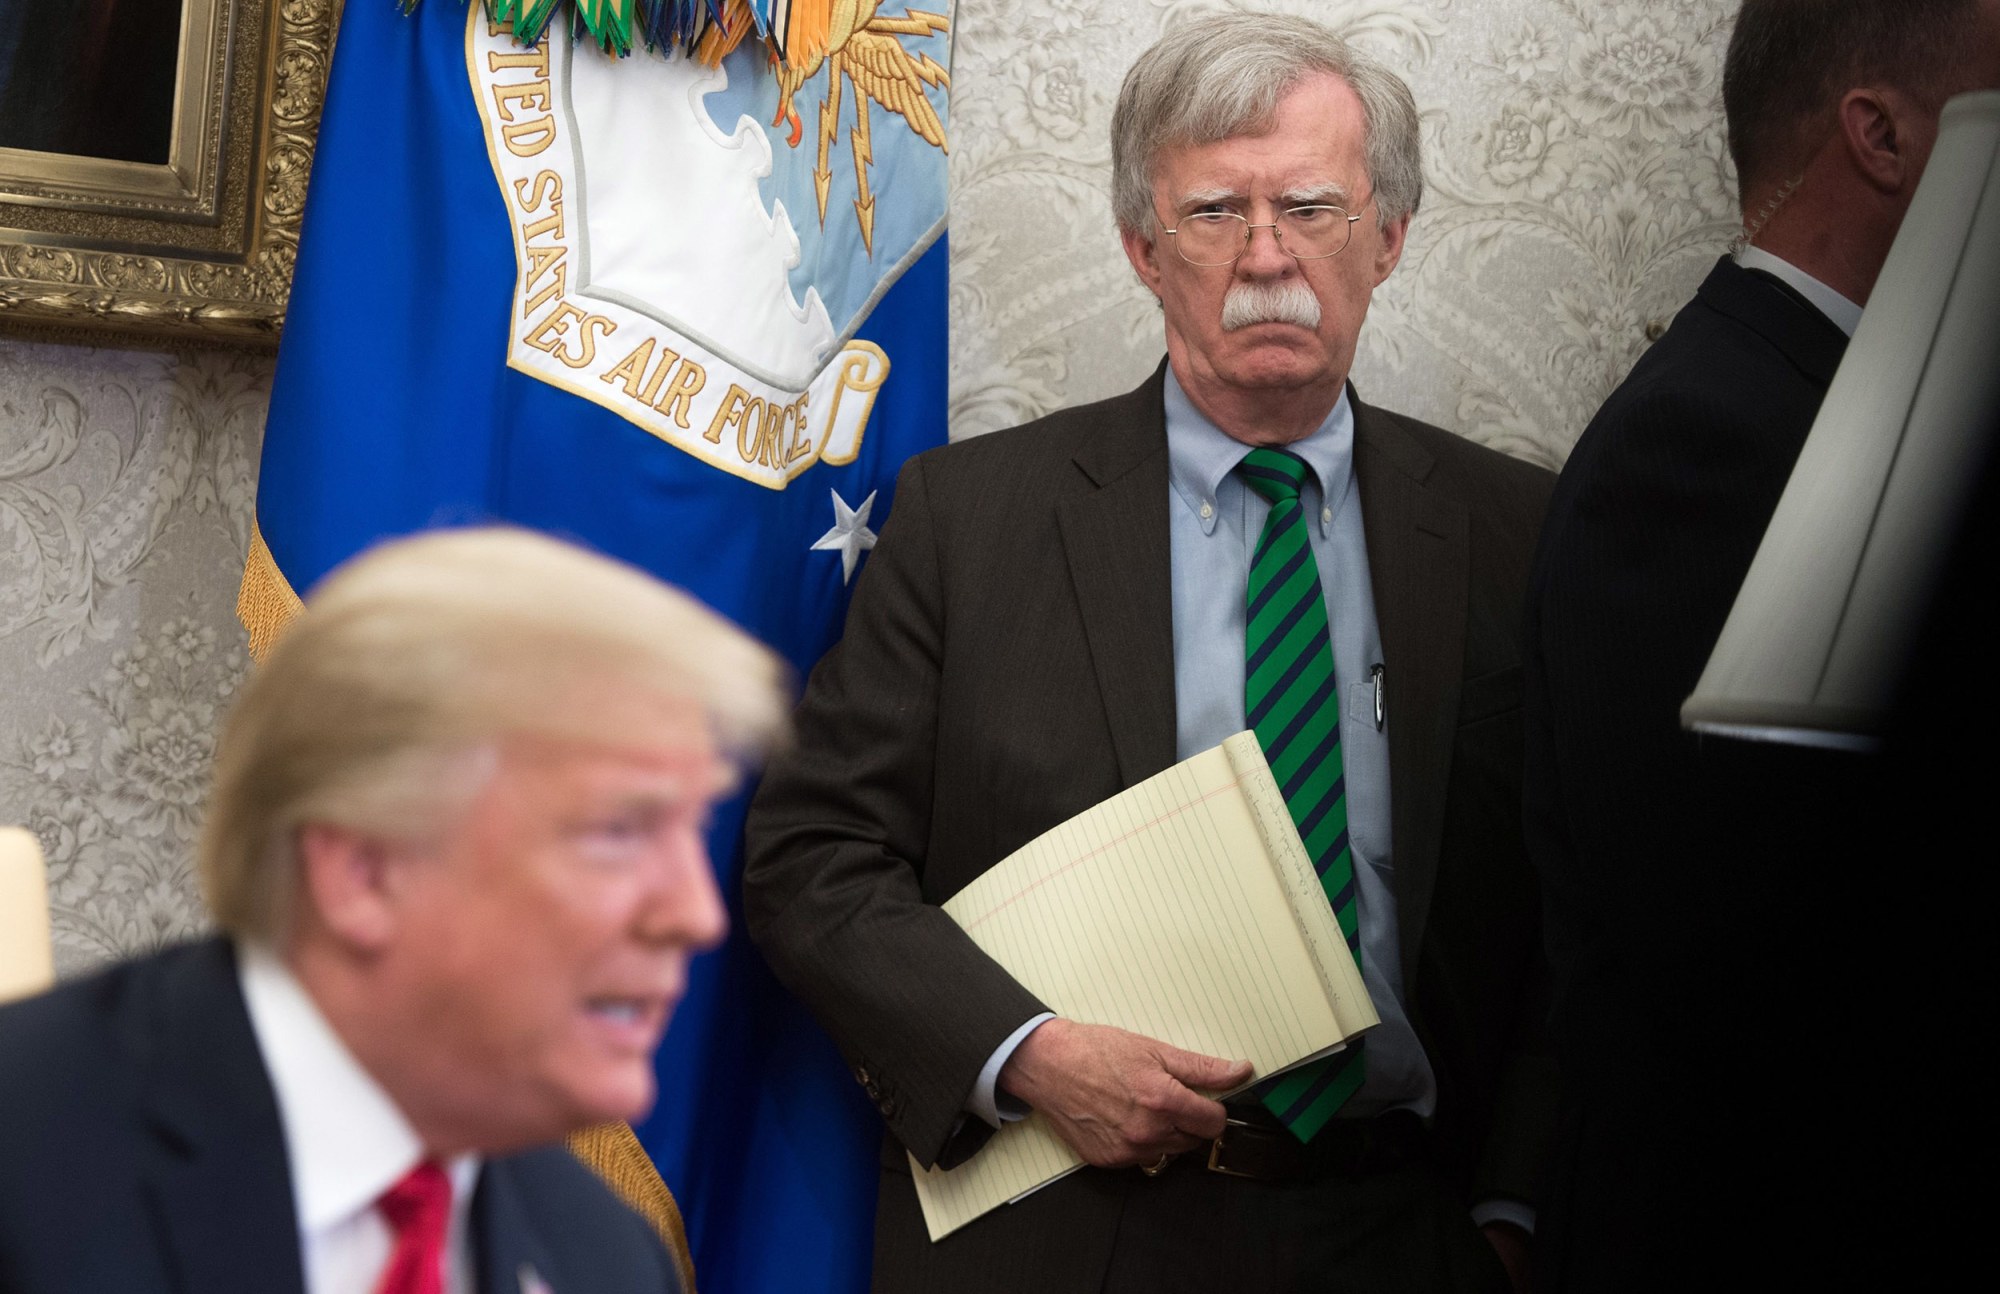 If the Deep State hates Trump, why aren't more officials speaking out like Bolton?